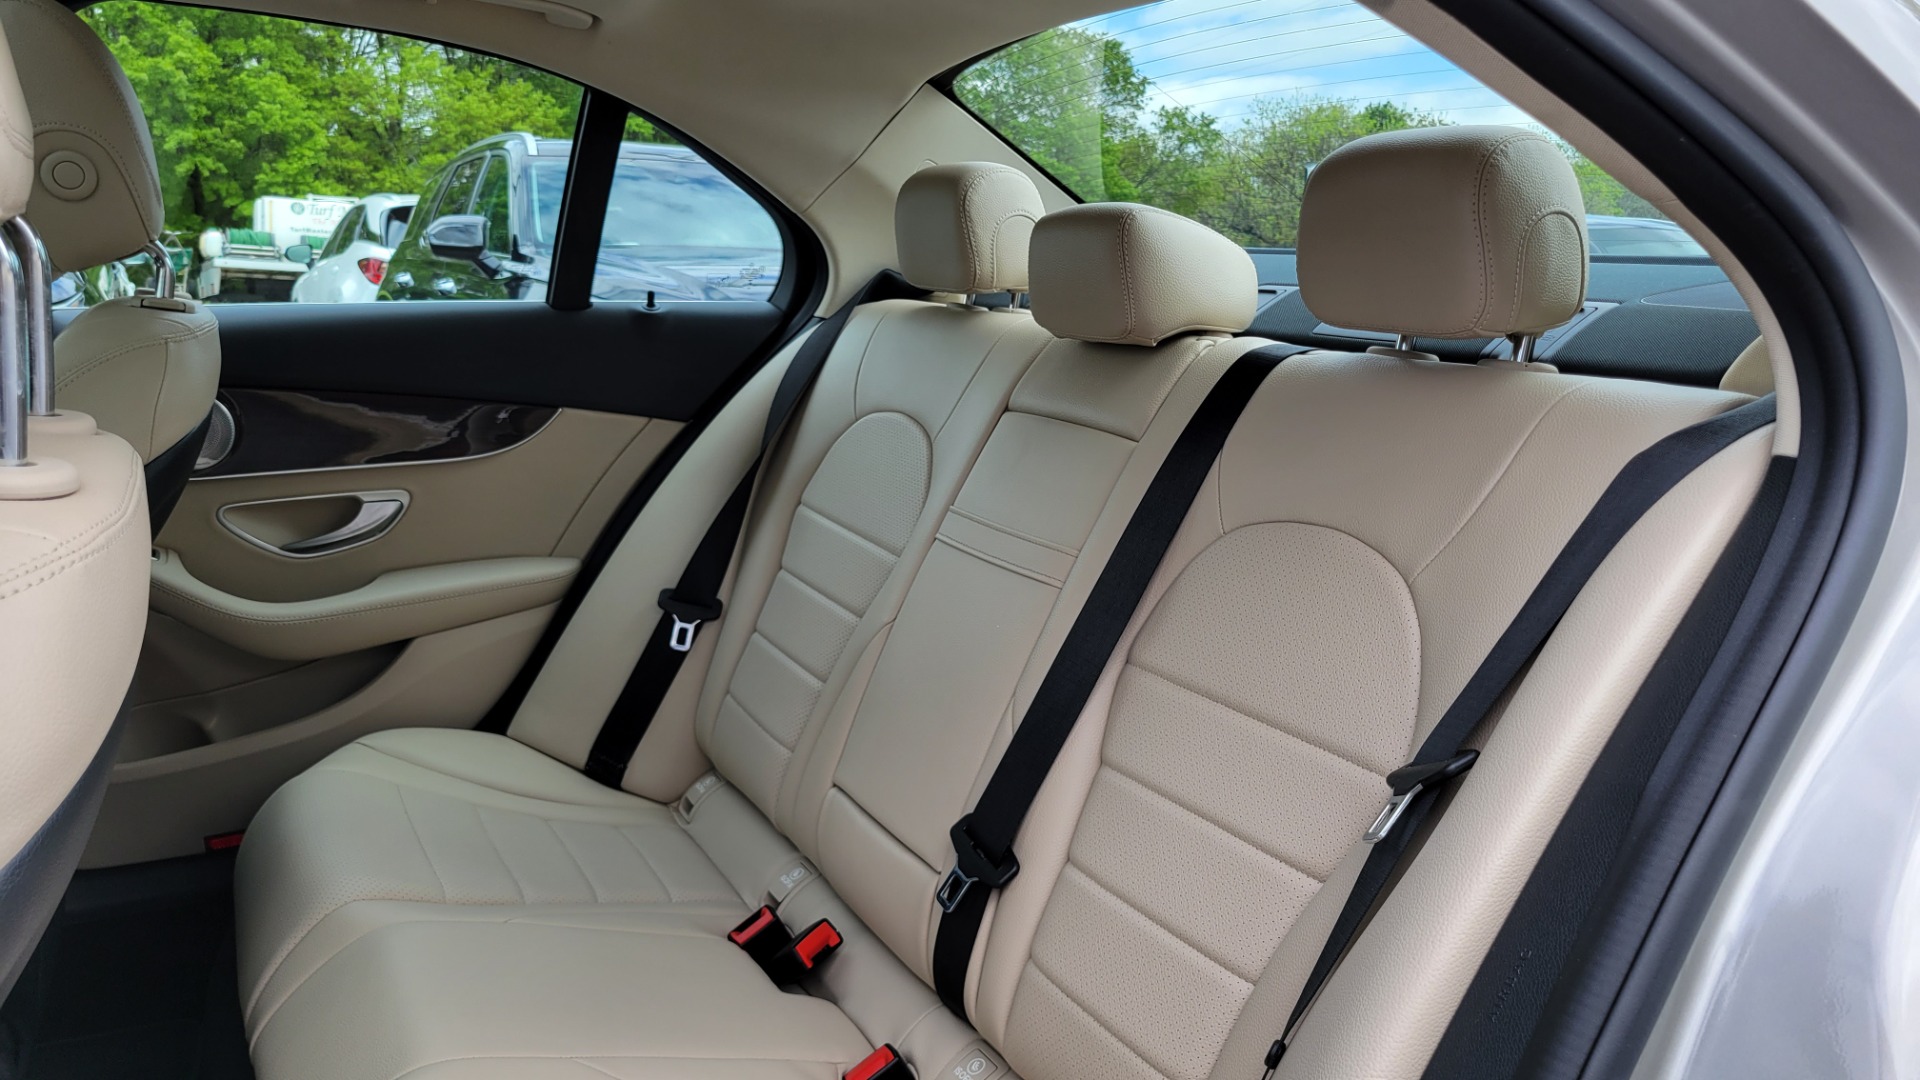 Used 2019 Mercedes-Benz C-CLASS C 300 PREMIUM 4MATIC / BURMESTER / KEYLESS-GO / REARVIEW for sale $37,395 at Formula Imports in Charlotte NC 28227 57